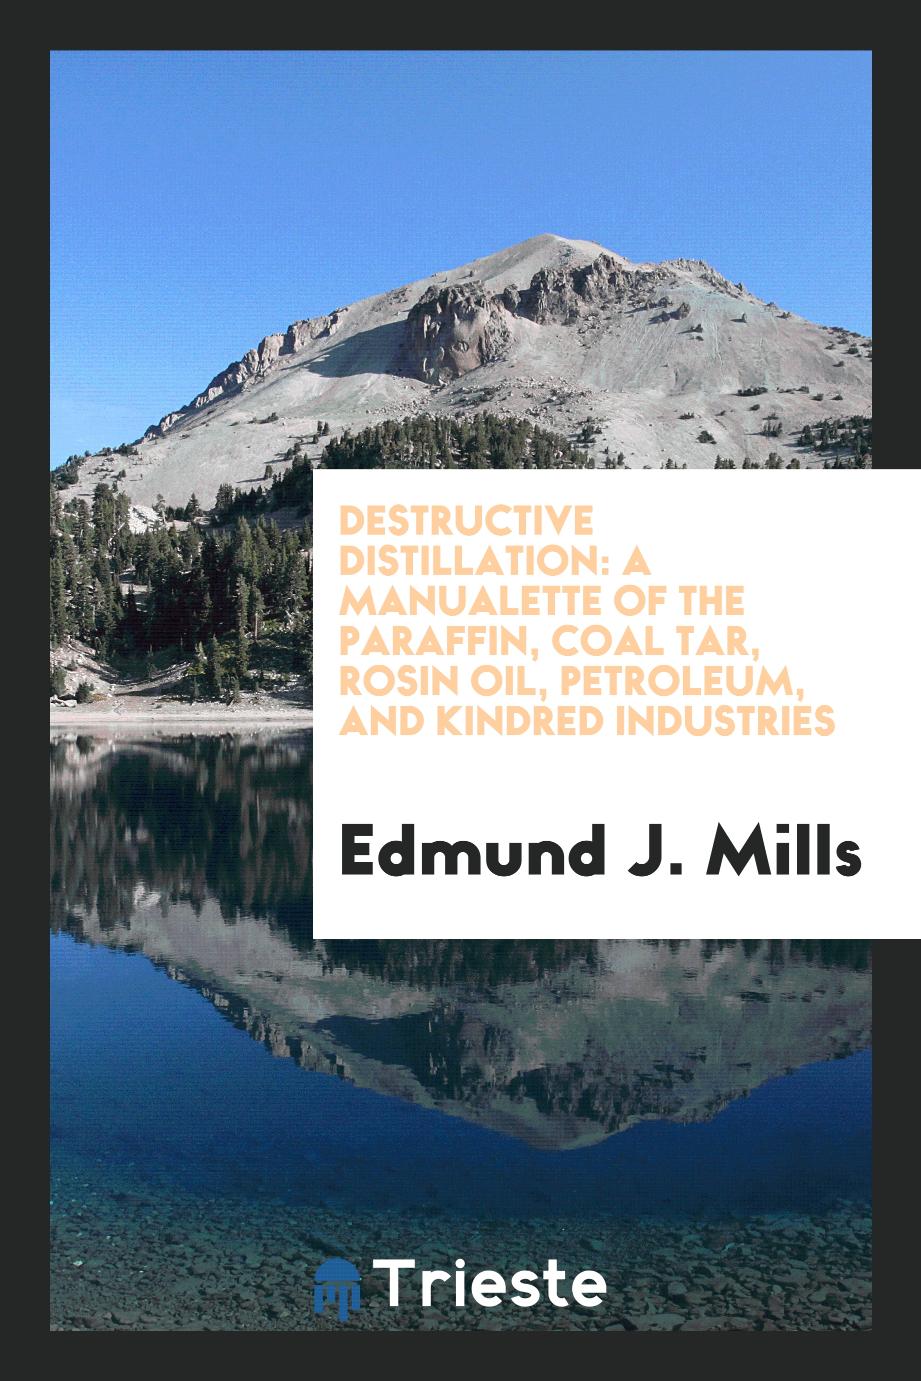 Destructive distillation: a manualette of the paraffin, coal tar, rosin oil, petroleum, and kindred industries